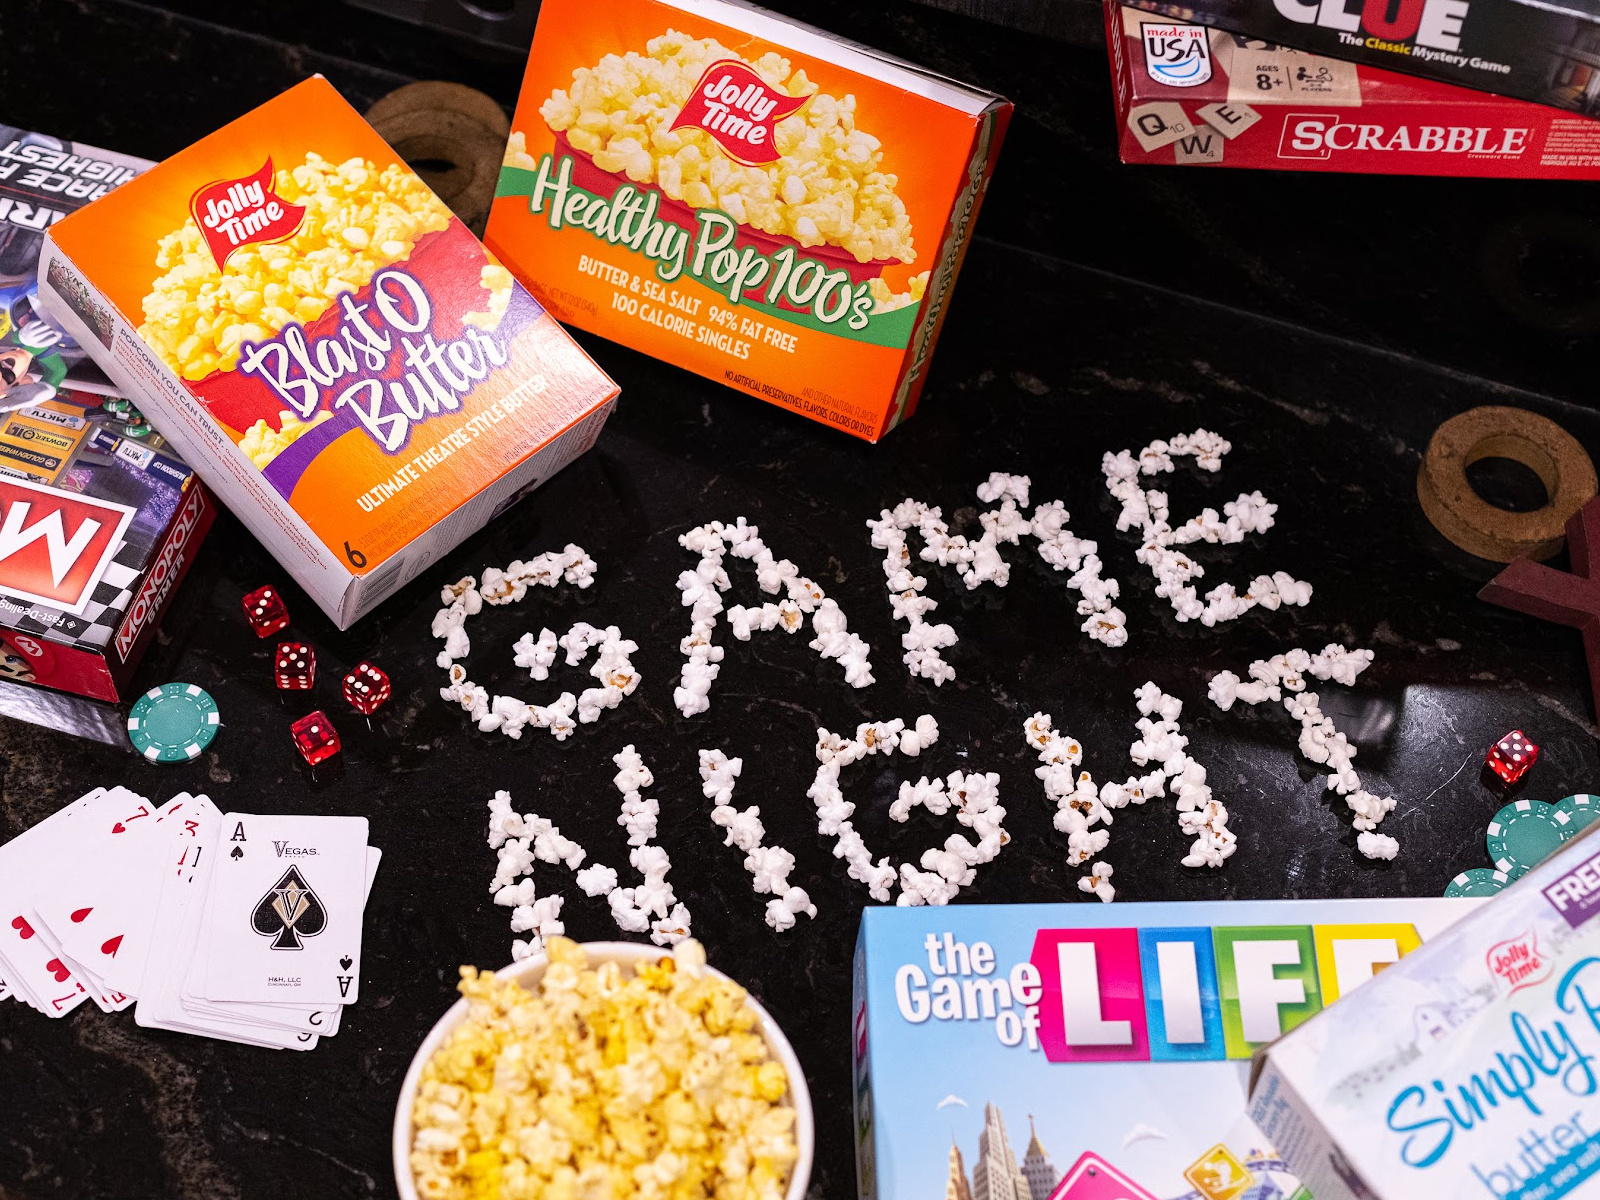 Stock Up On JOLLY TIME Pop Corn During The BOGO Sale + Enter To Win A $250 Game Night Prize Package!